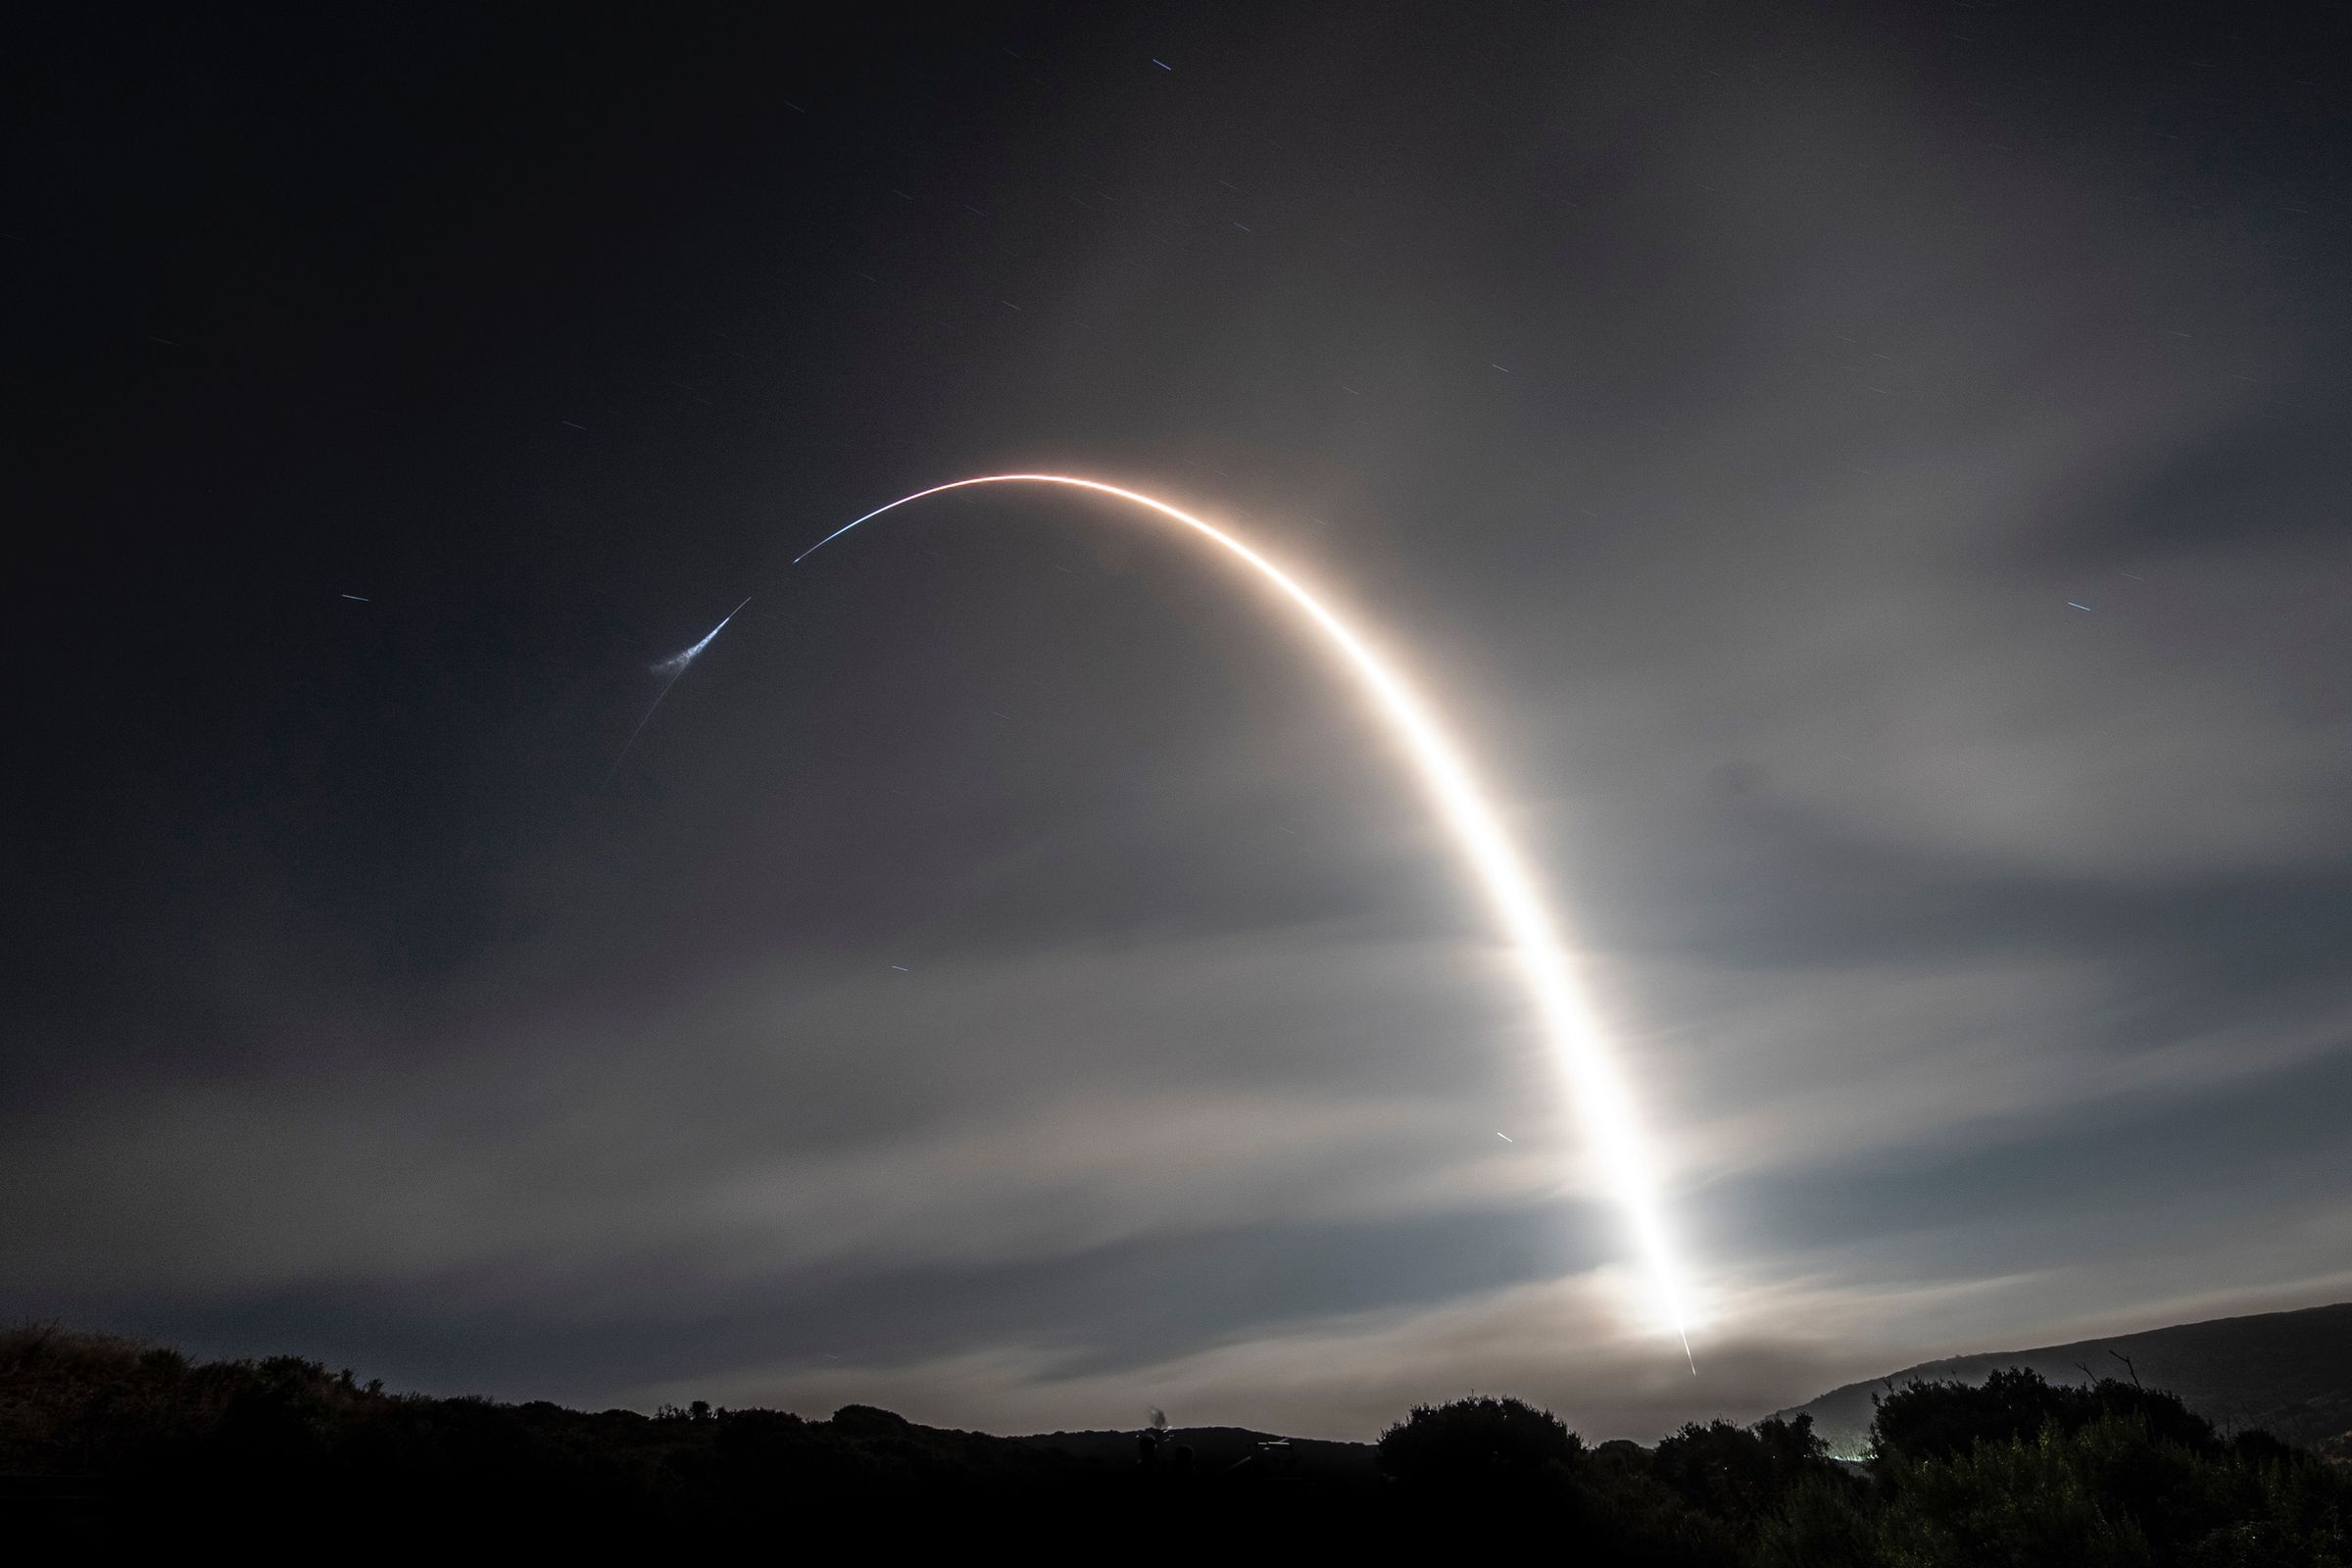 A SpaceX Falcon 9 rocket launching from Vandenberg Air Force Base.